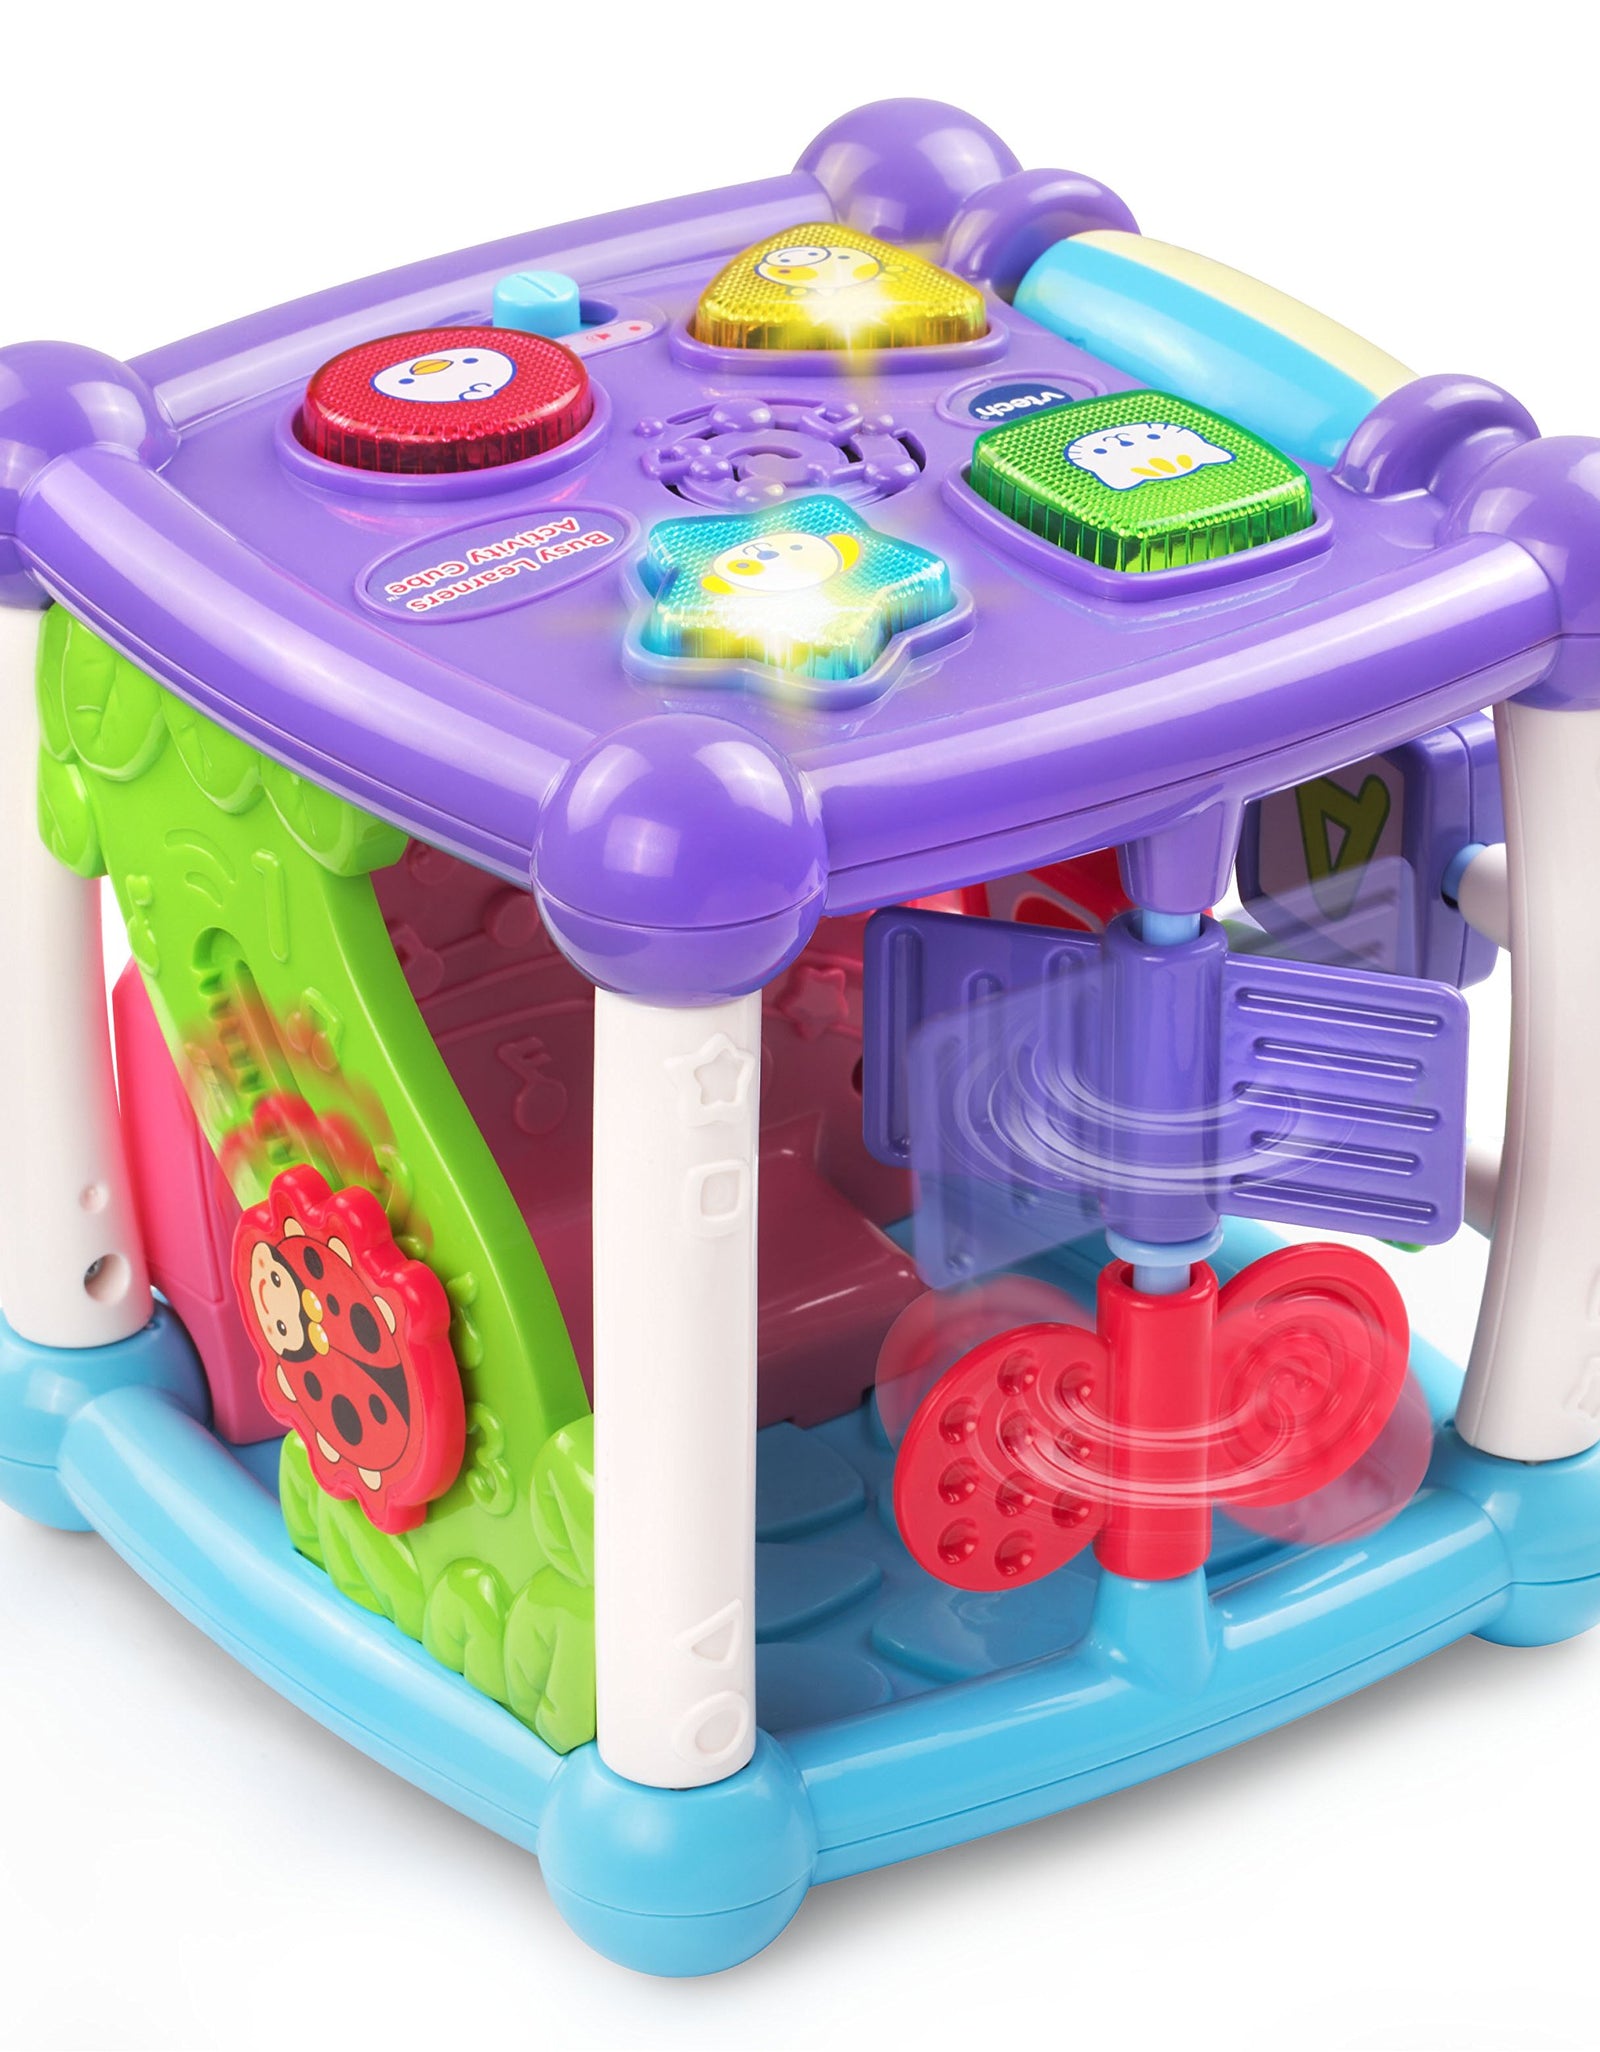 VTech Busy Learners Activity Cube, Purple